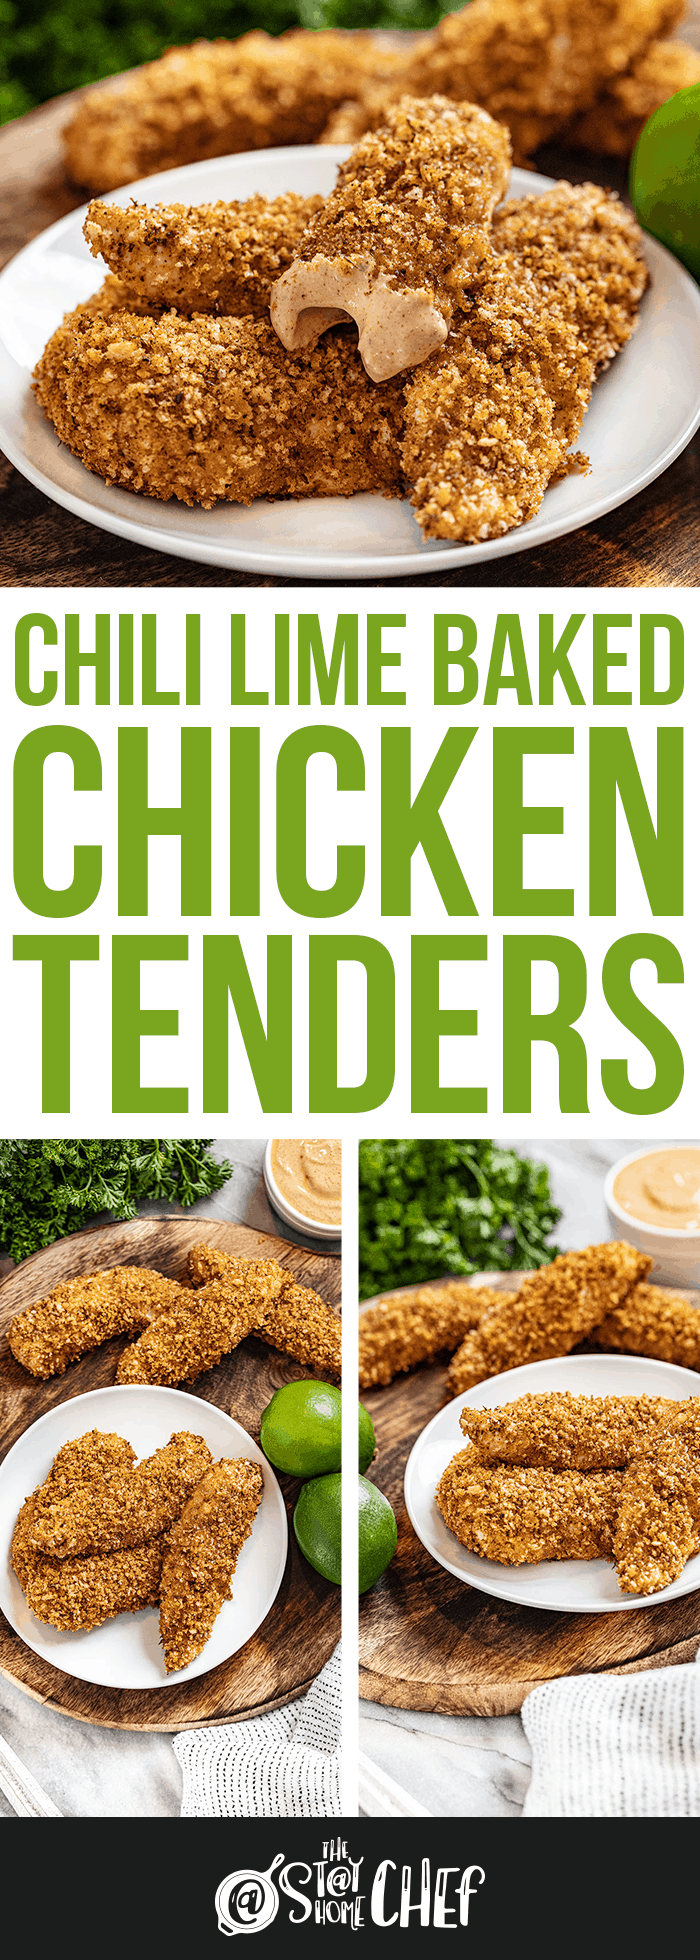 Chili-Lime Baked Chicken Tenders